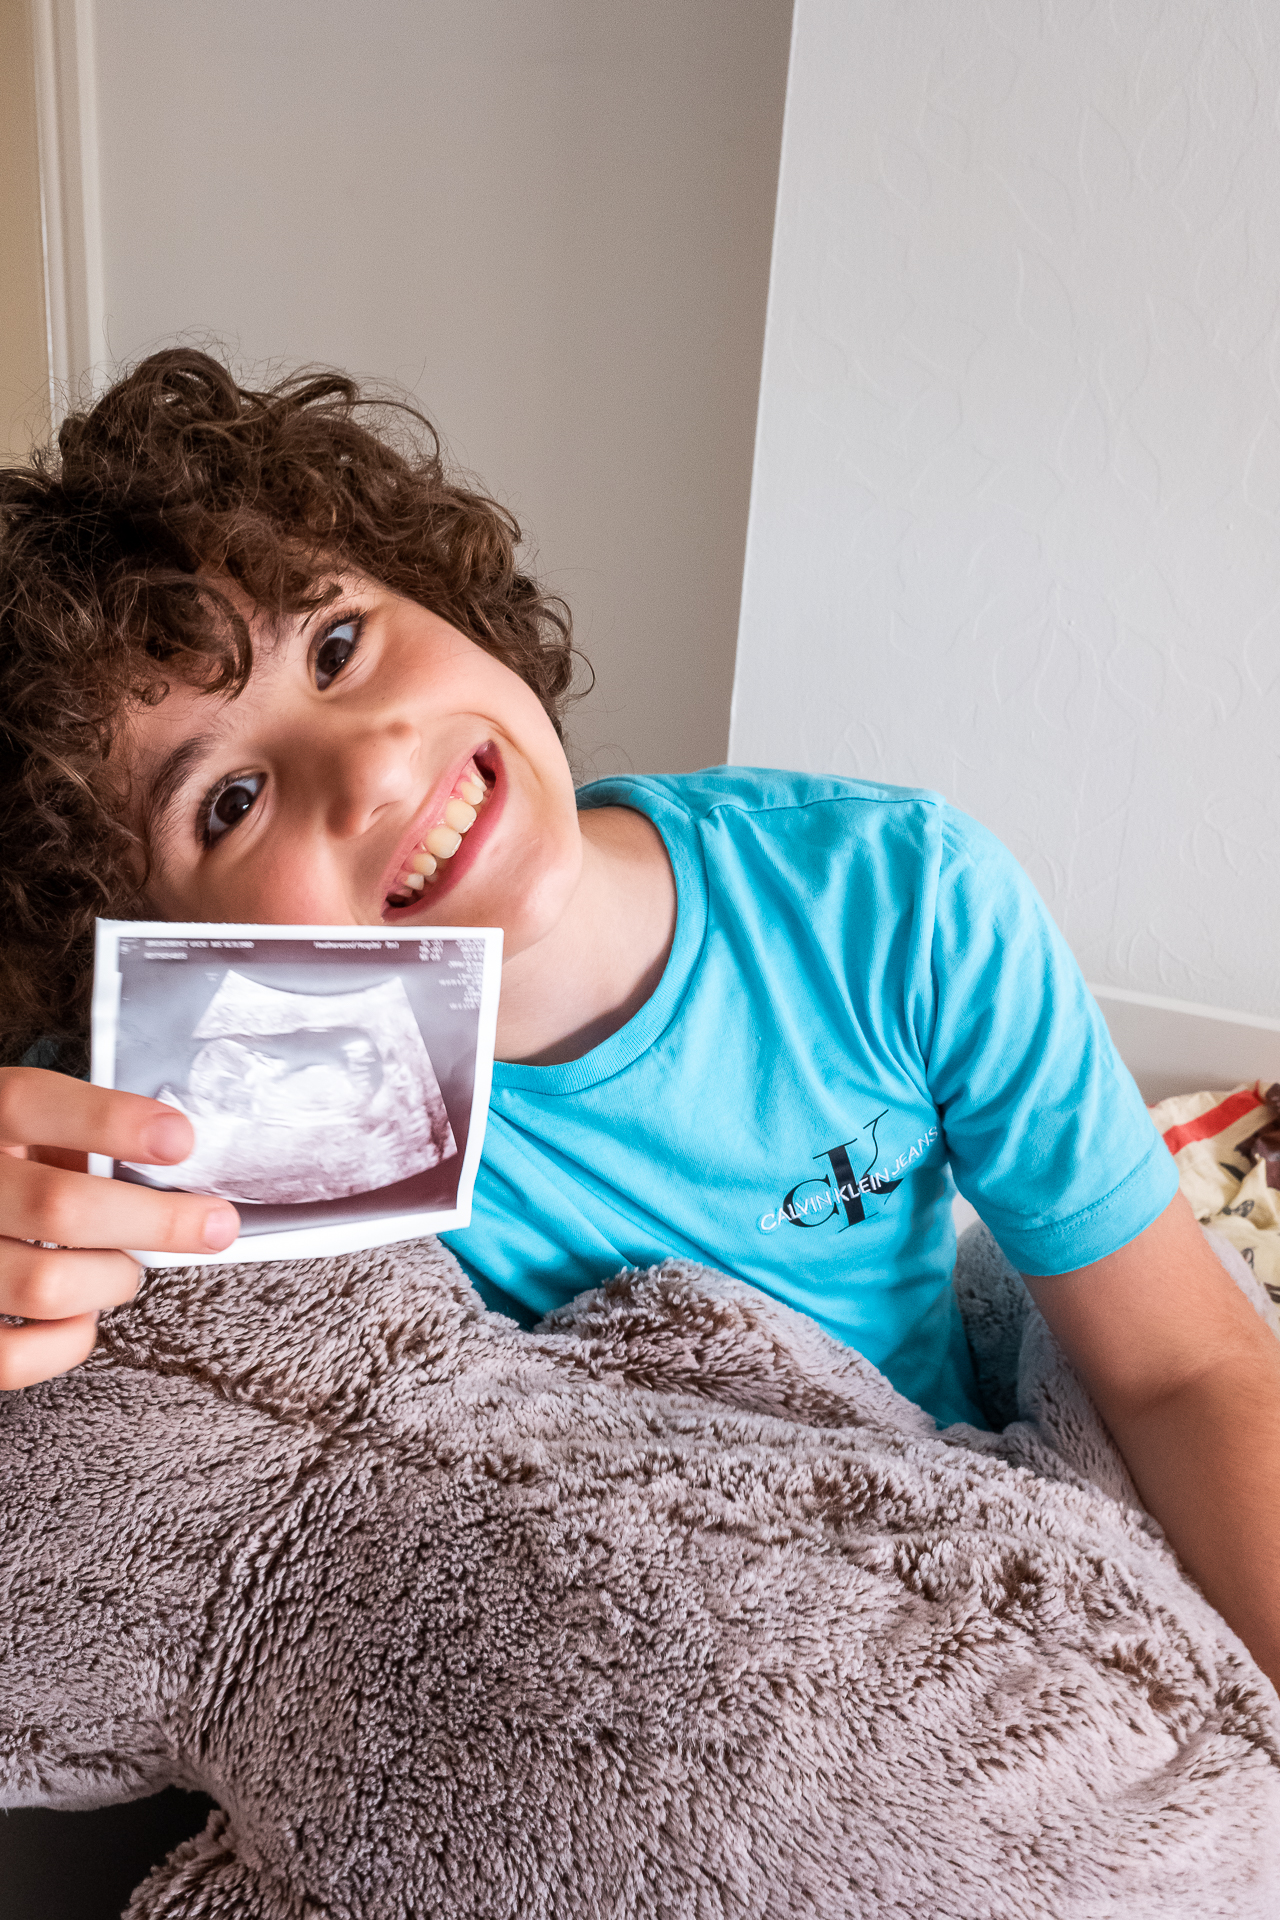 Honest Mum's son holds up the scan photo of her baby girl